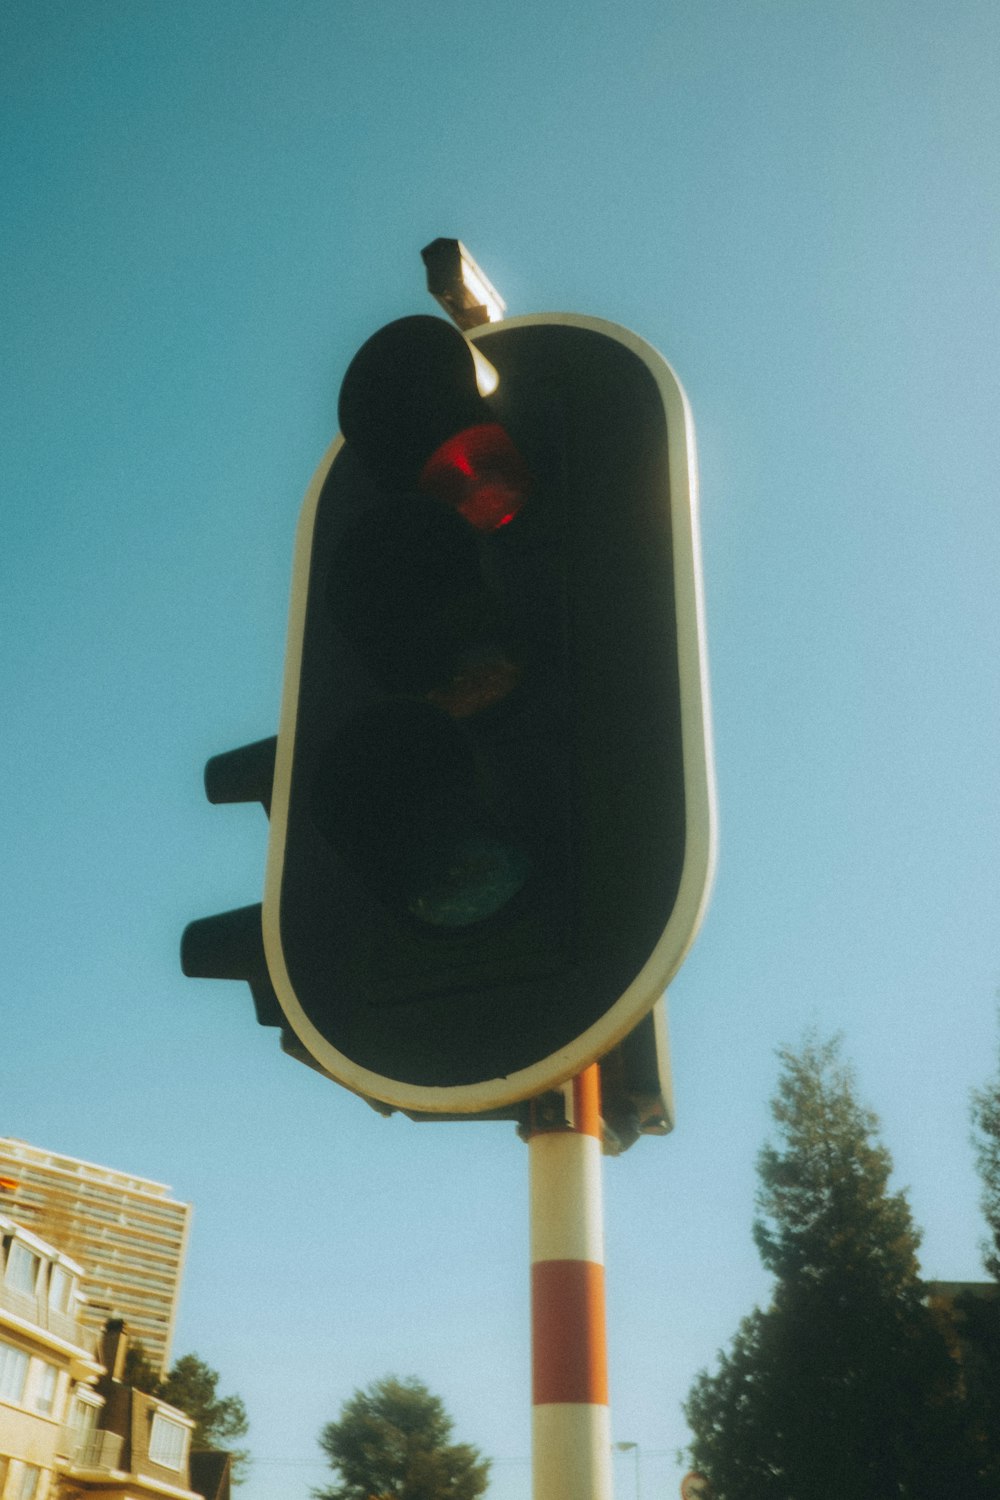 a traffic light with a bird sitting on top of it